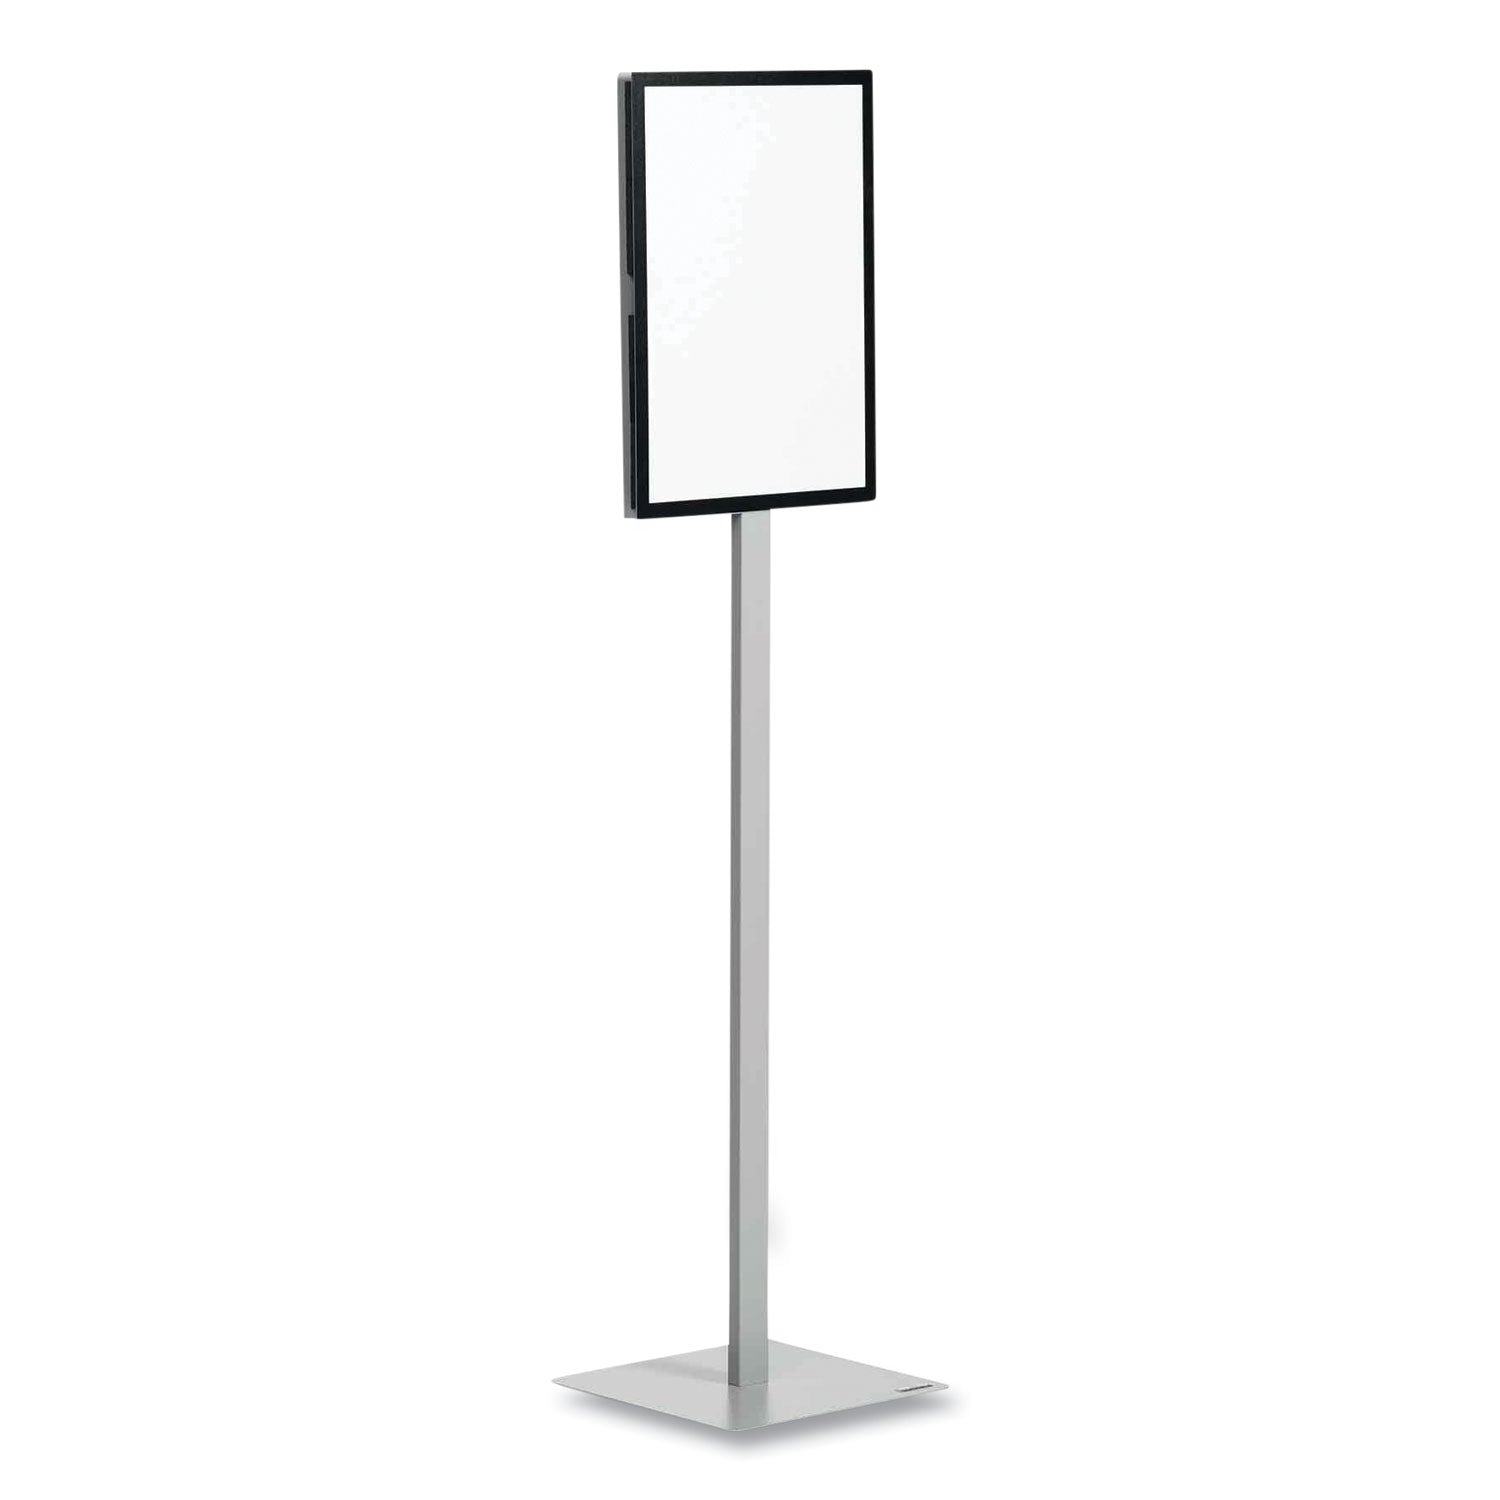 info-basic-floor-stand-5531-tall-black-stand-11-x-17-face_dbl501157 - 3